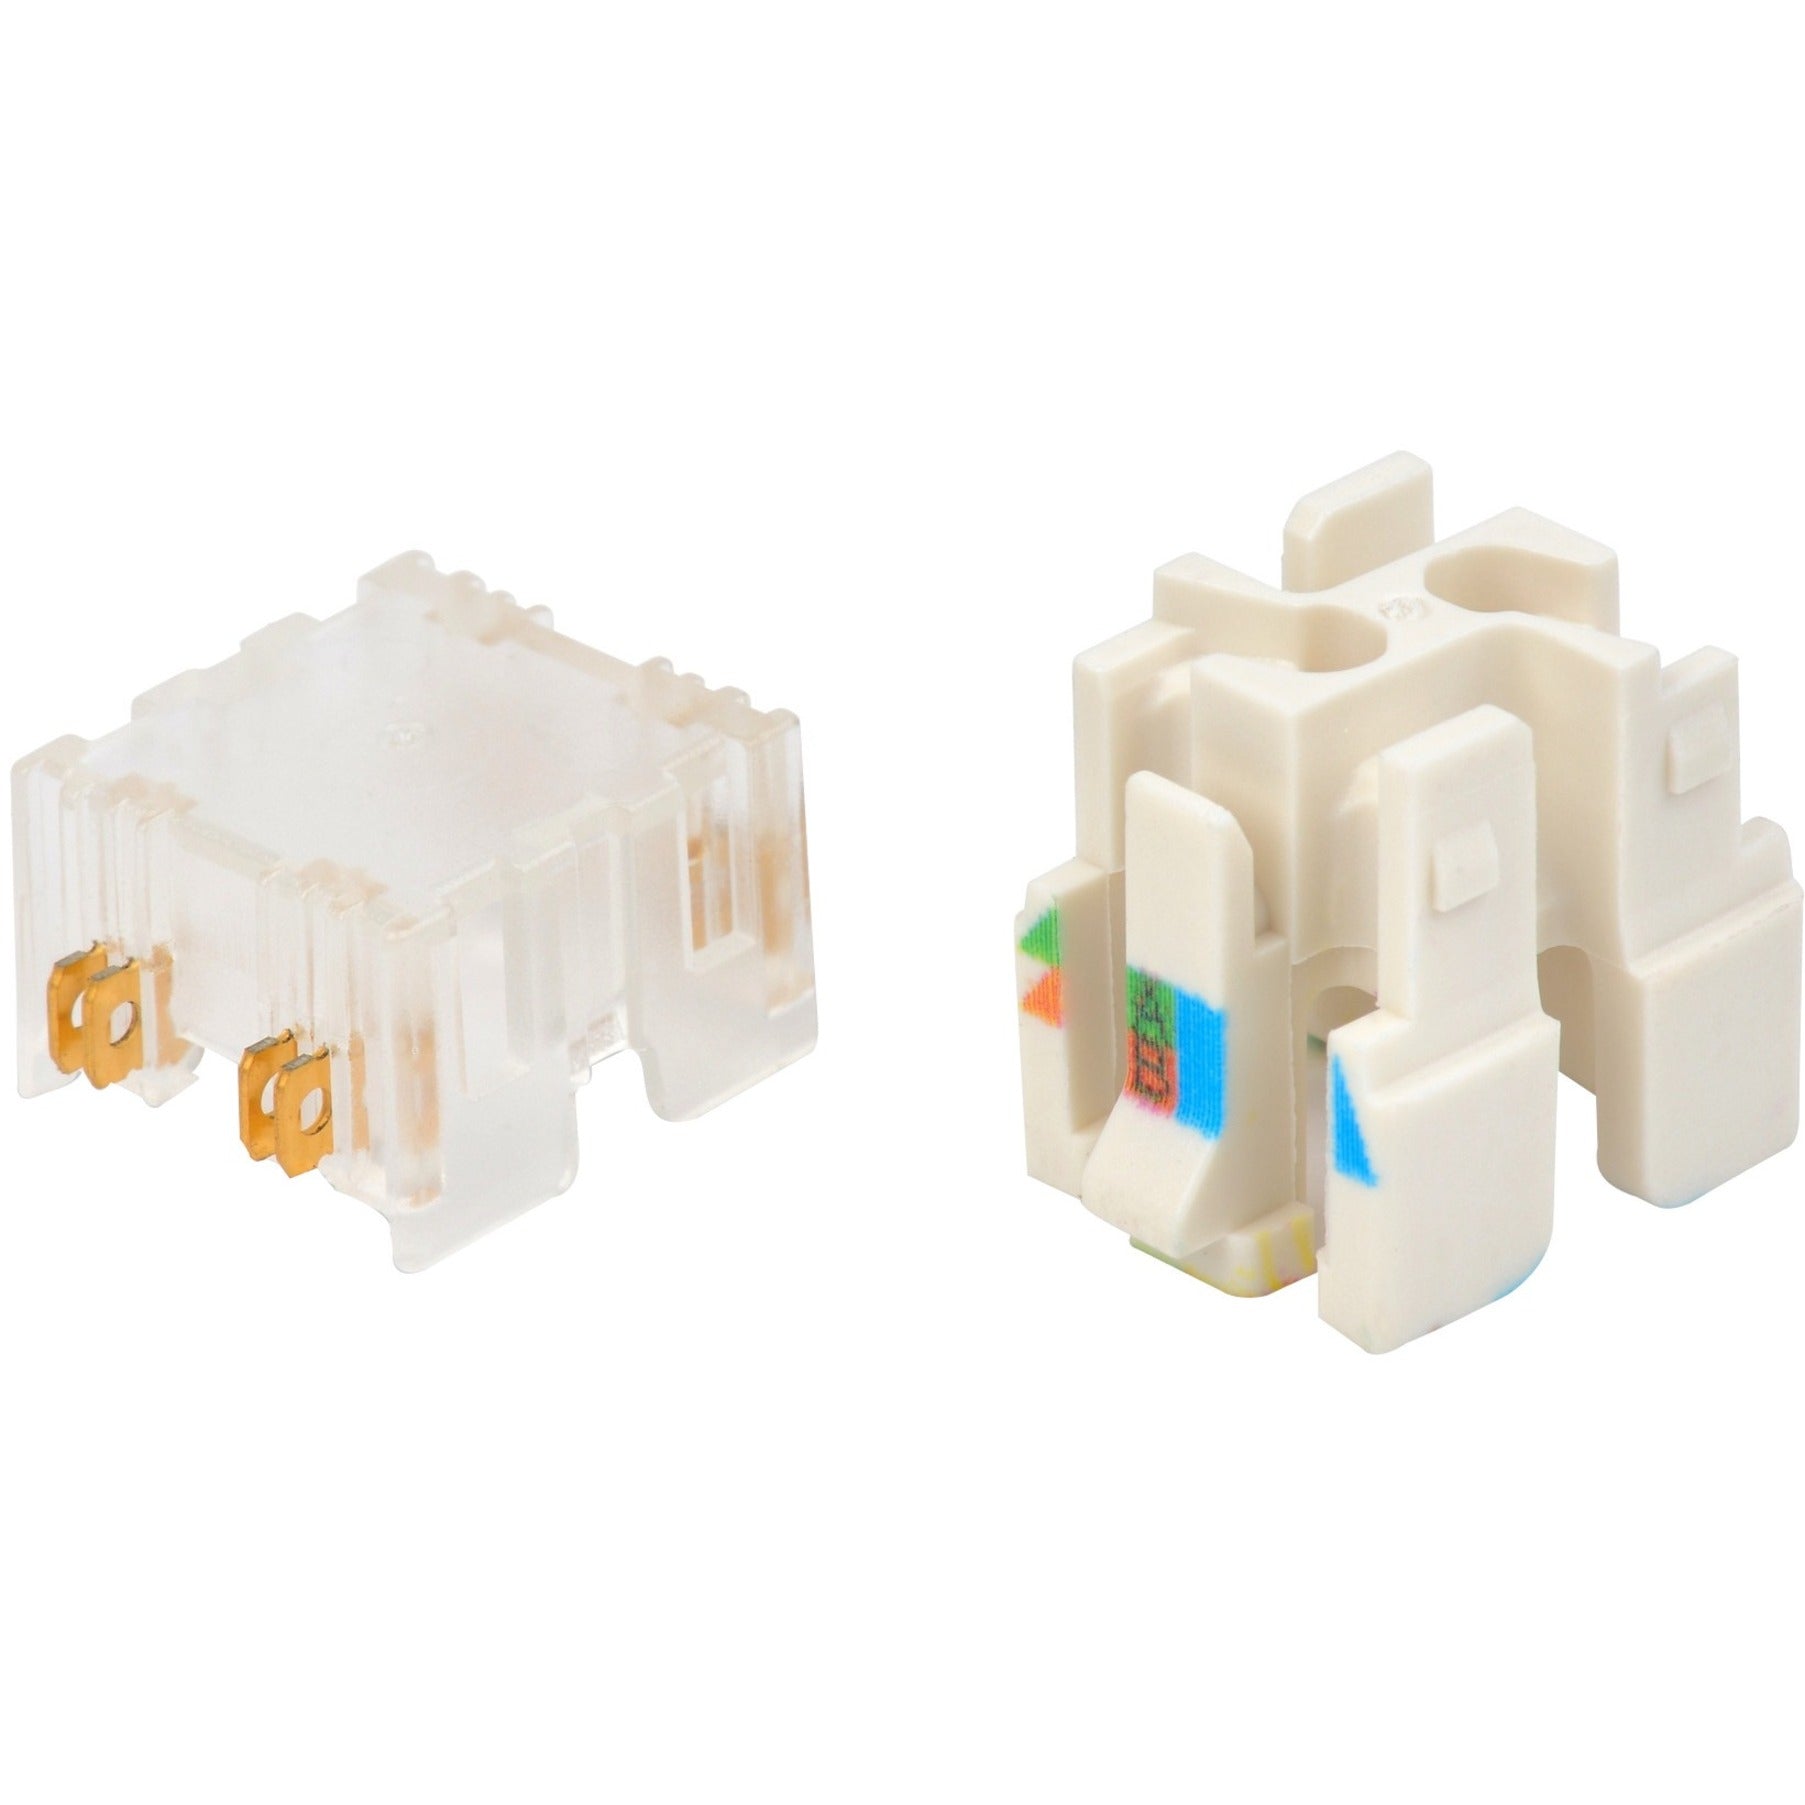 Belden RVUCOEW-B50 REVConnect Cores 50 Pack, RJ-45 Network Connector, Nickel/Gold Plating